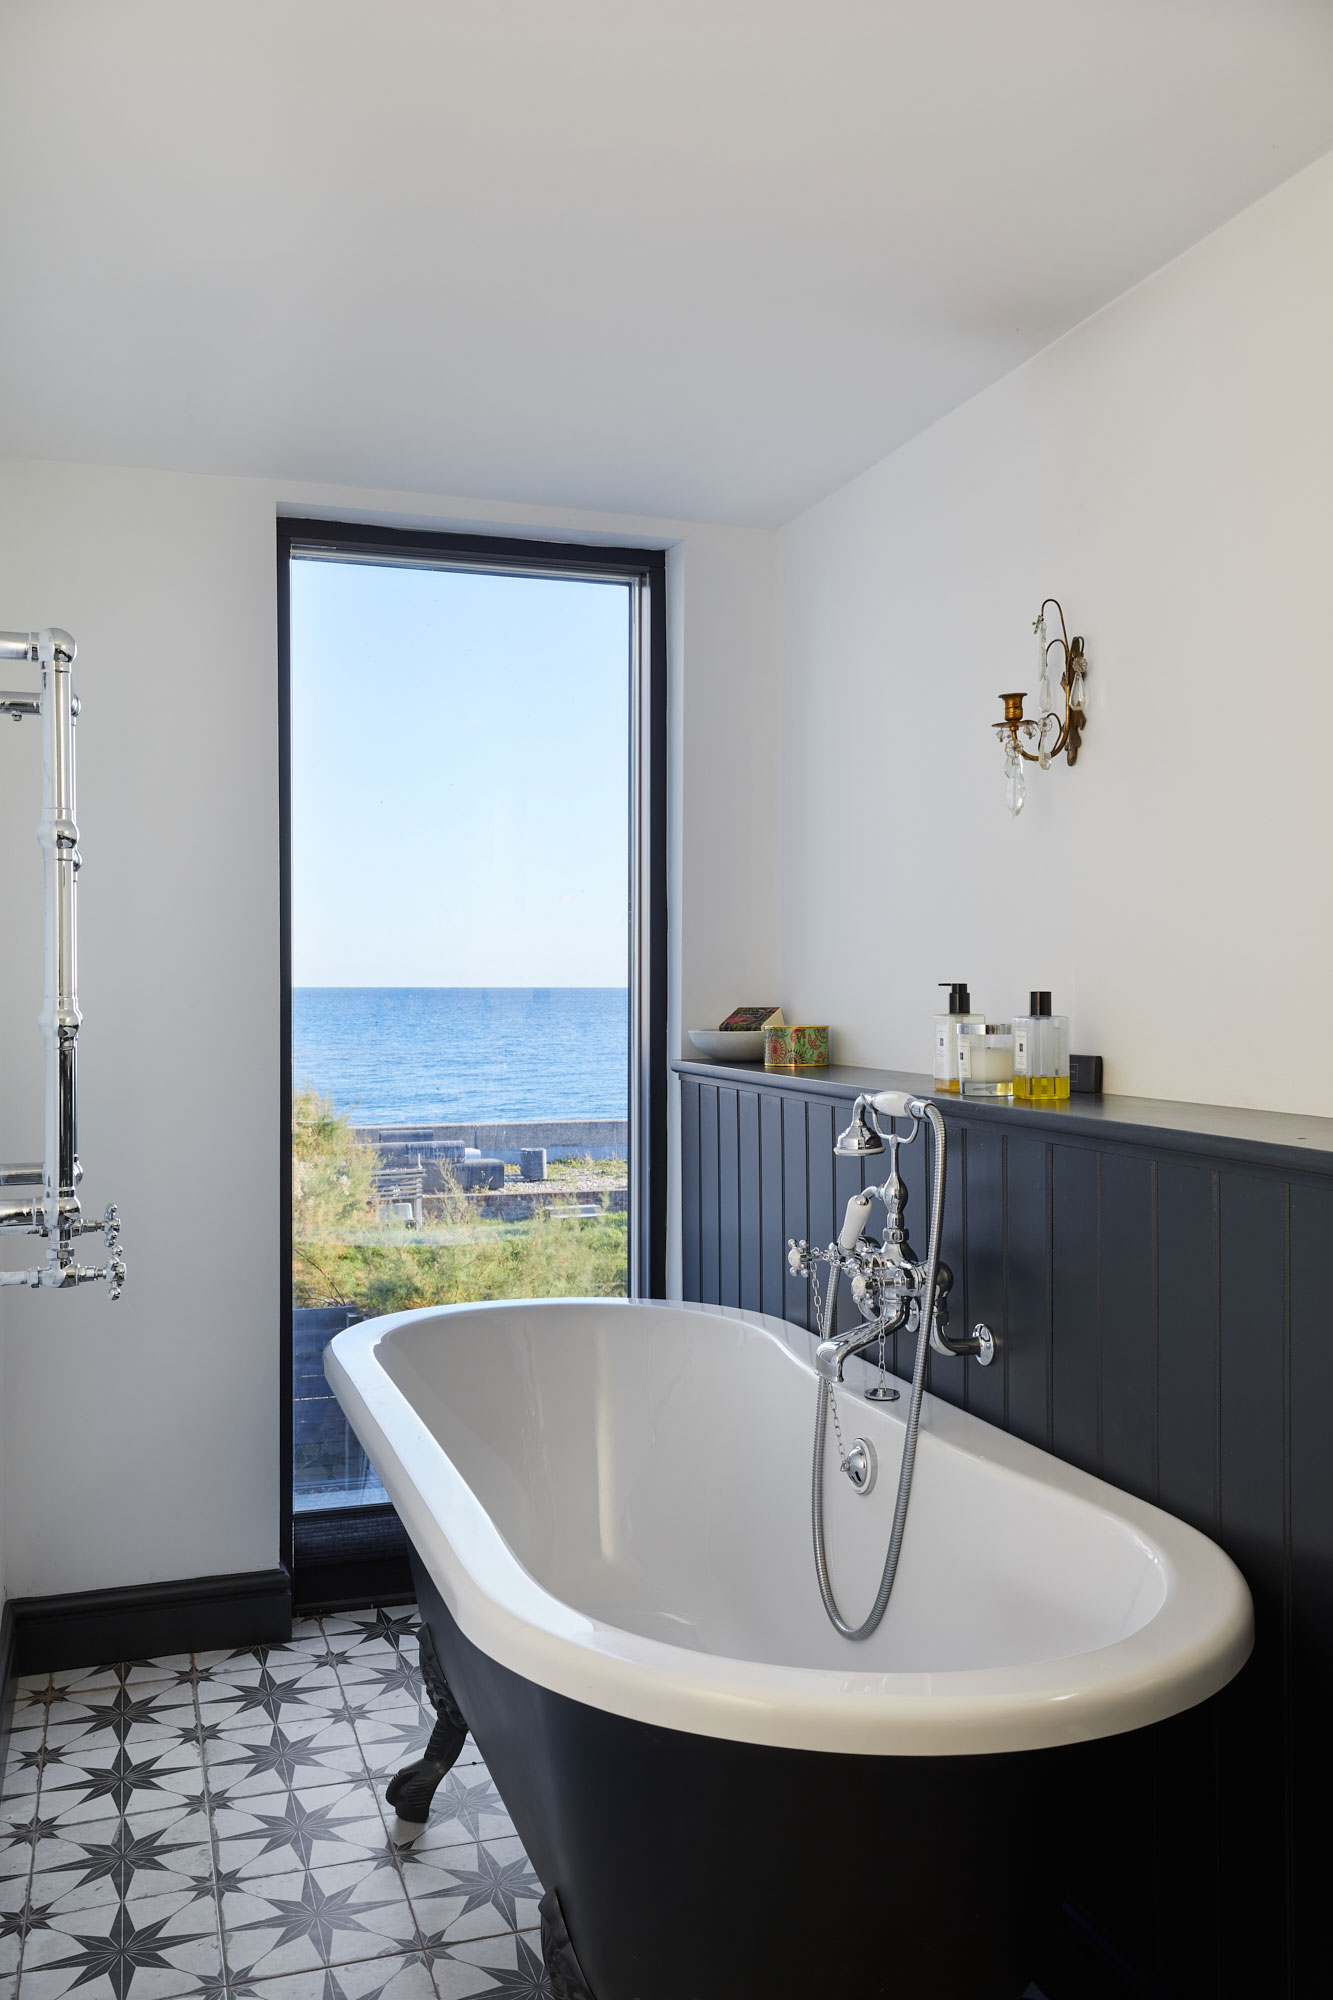 Freestanding bath with sea view